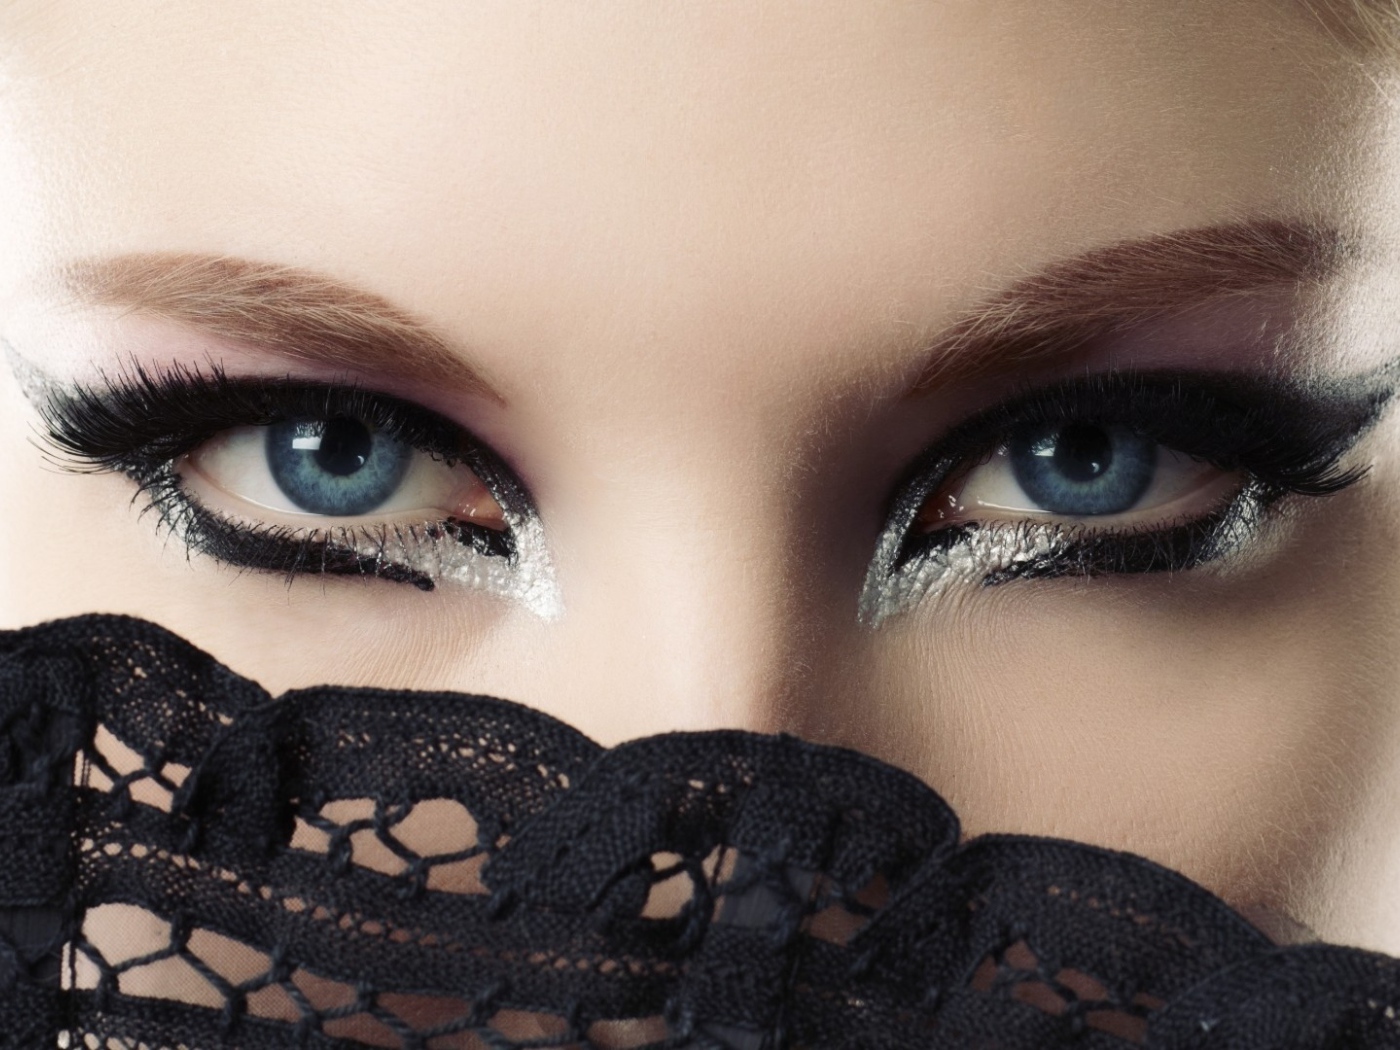 Blue eyes in a beautiful make-up